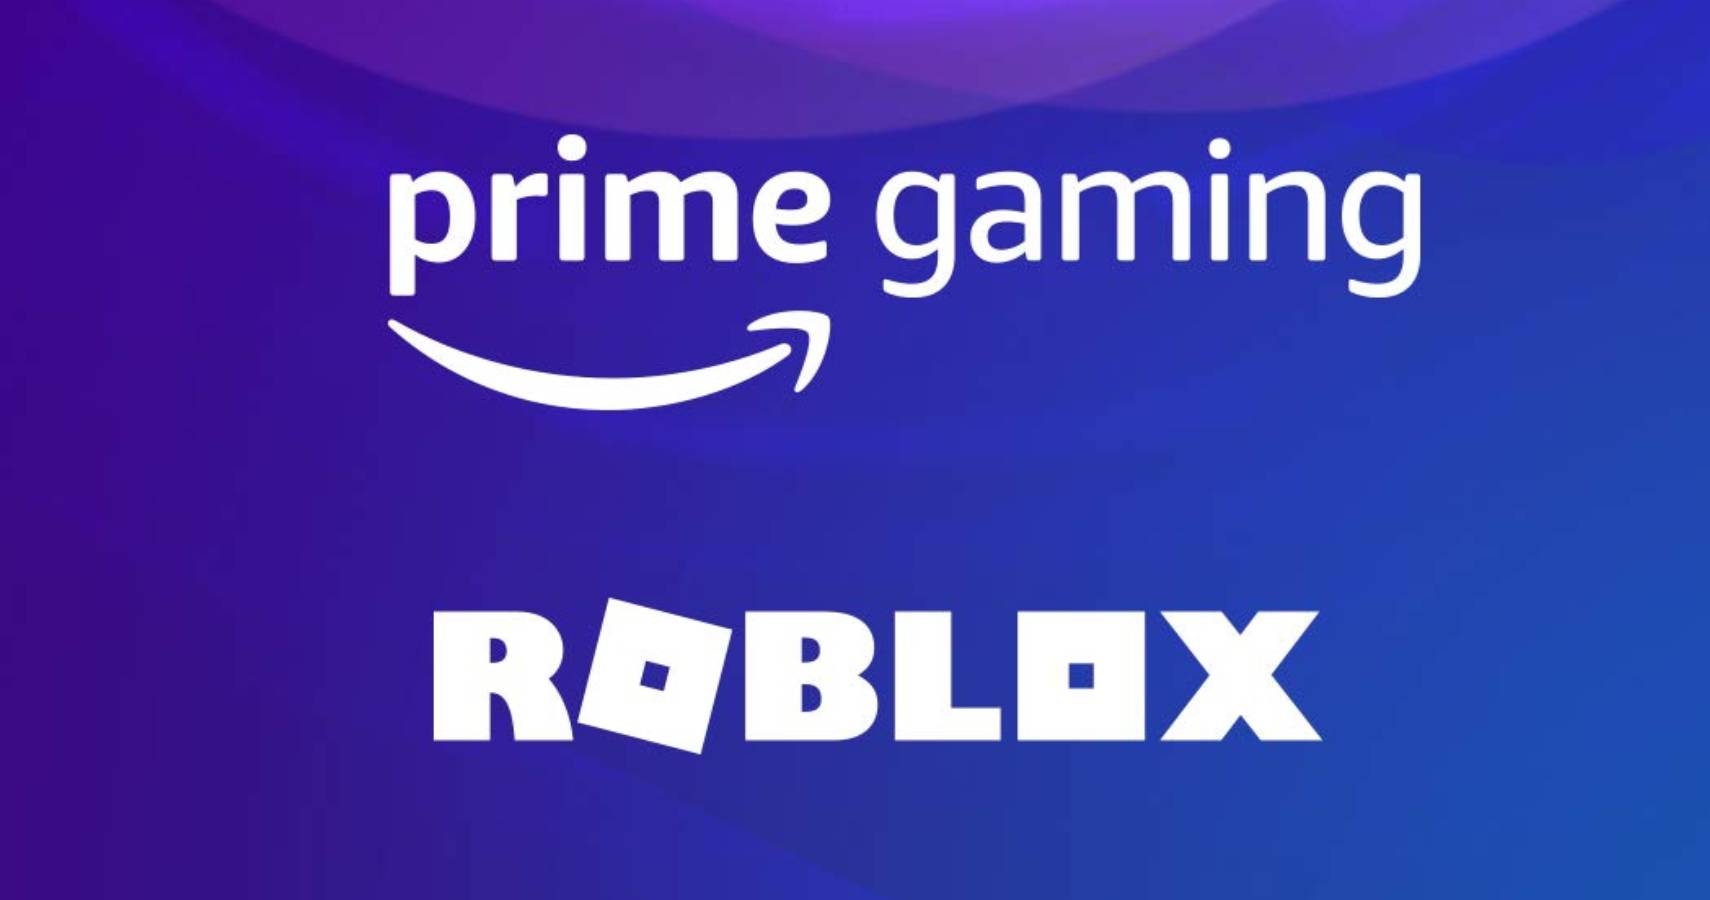 Prime Gaming S First New Benefit Is Exclusive Roblox Content - roblox amazon prime